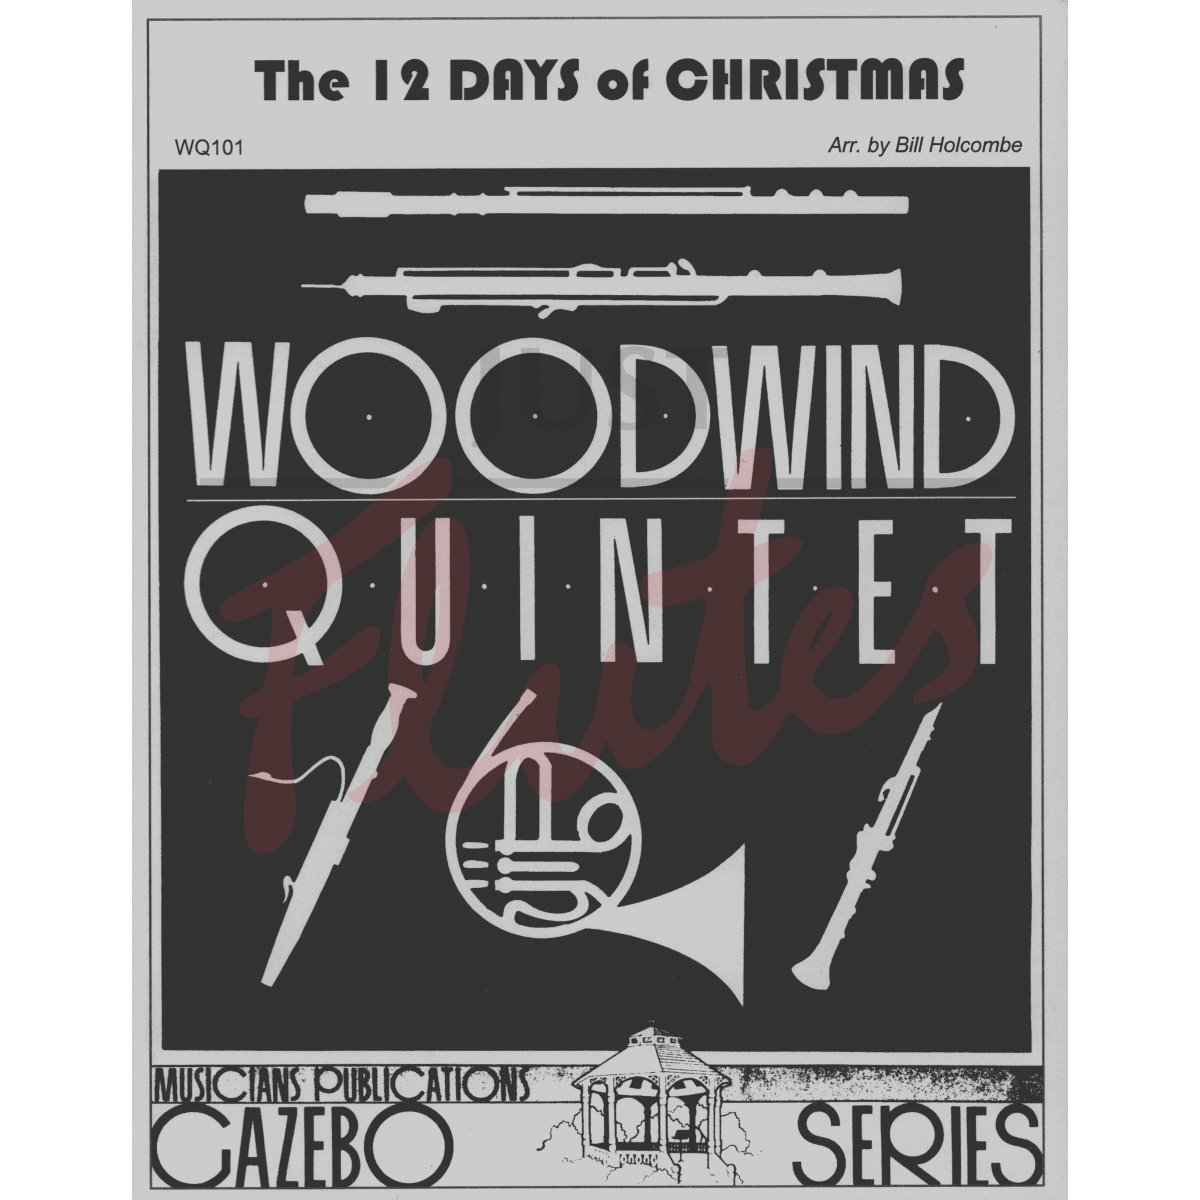 The 12 Days of Christmas [Wind Quintet]